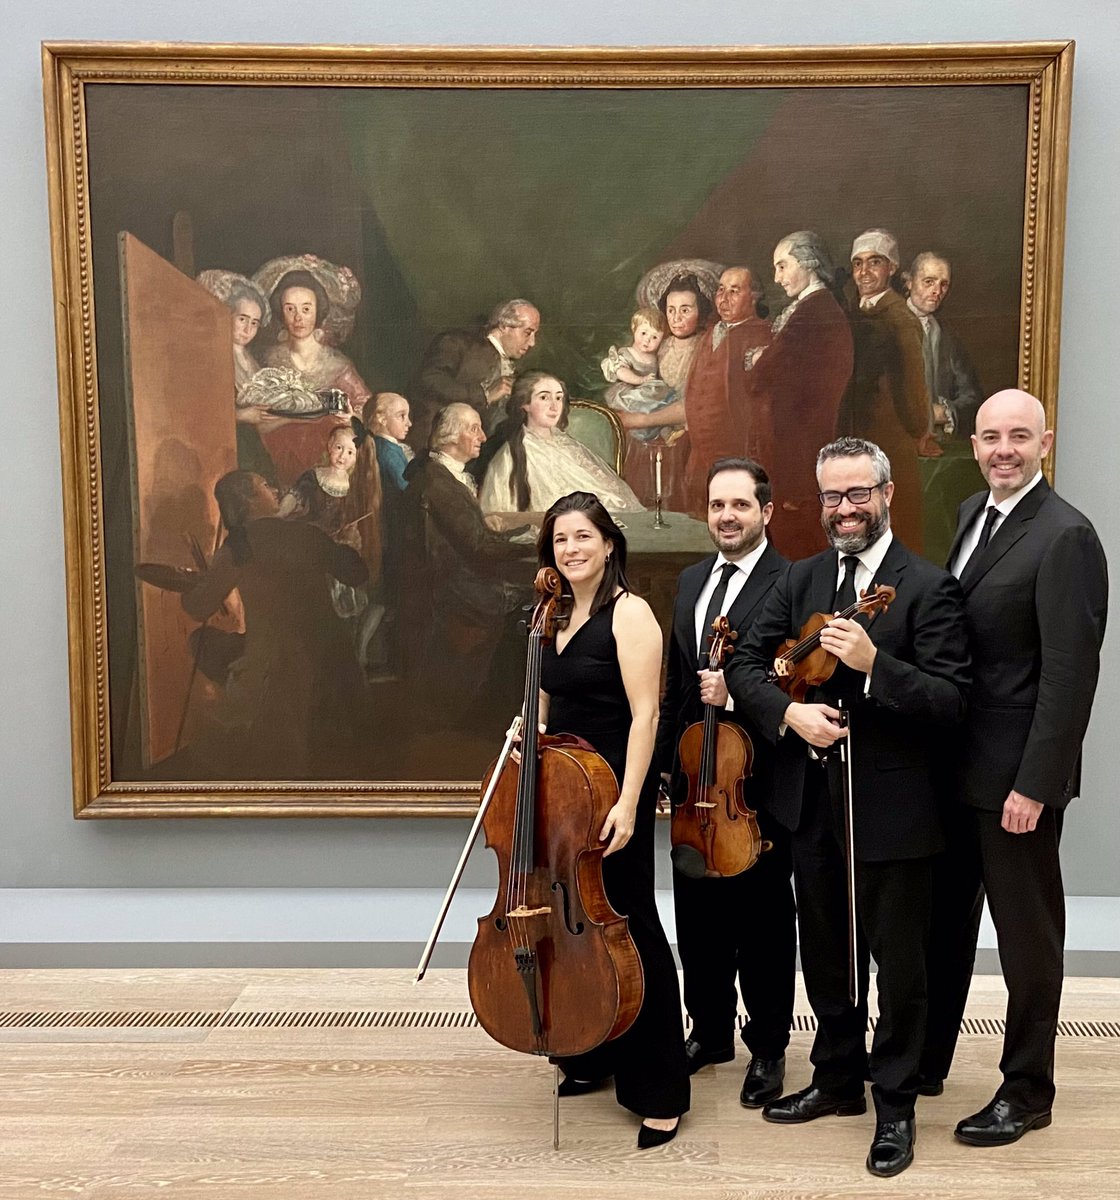 When we published our CD #Heritage, devoted to “The Music of Madrid in the Time of #Goya”, for our cover, we got inside Goya’s painting where #Boccherini is depicted. How moving to see it now live at @Fond_Beyeler after playing there the same music for their amazing Goya Exhibit! https://t.co/Xm0CPXiugM